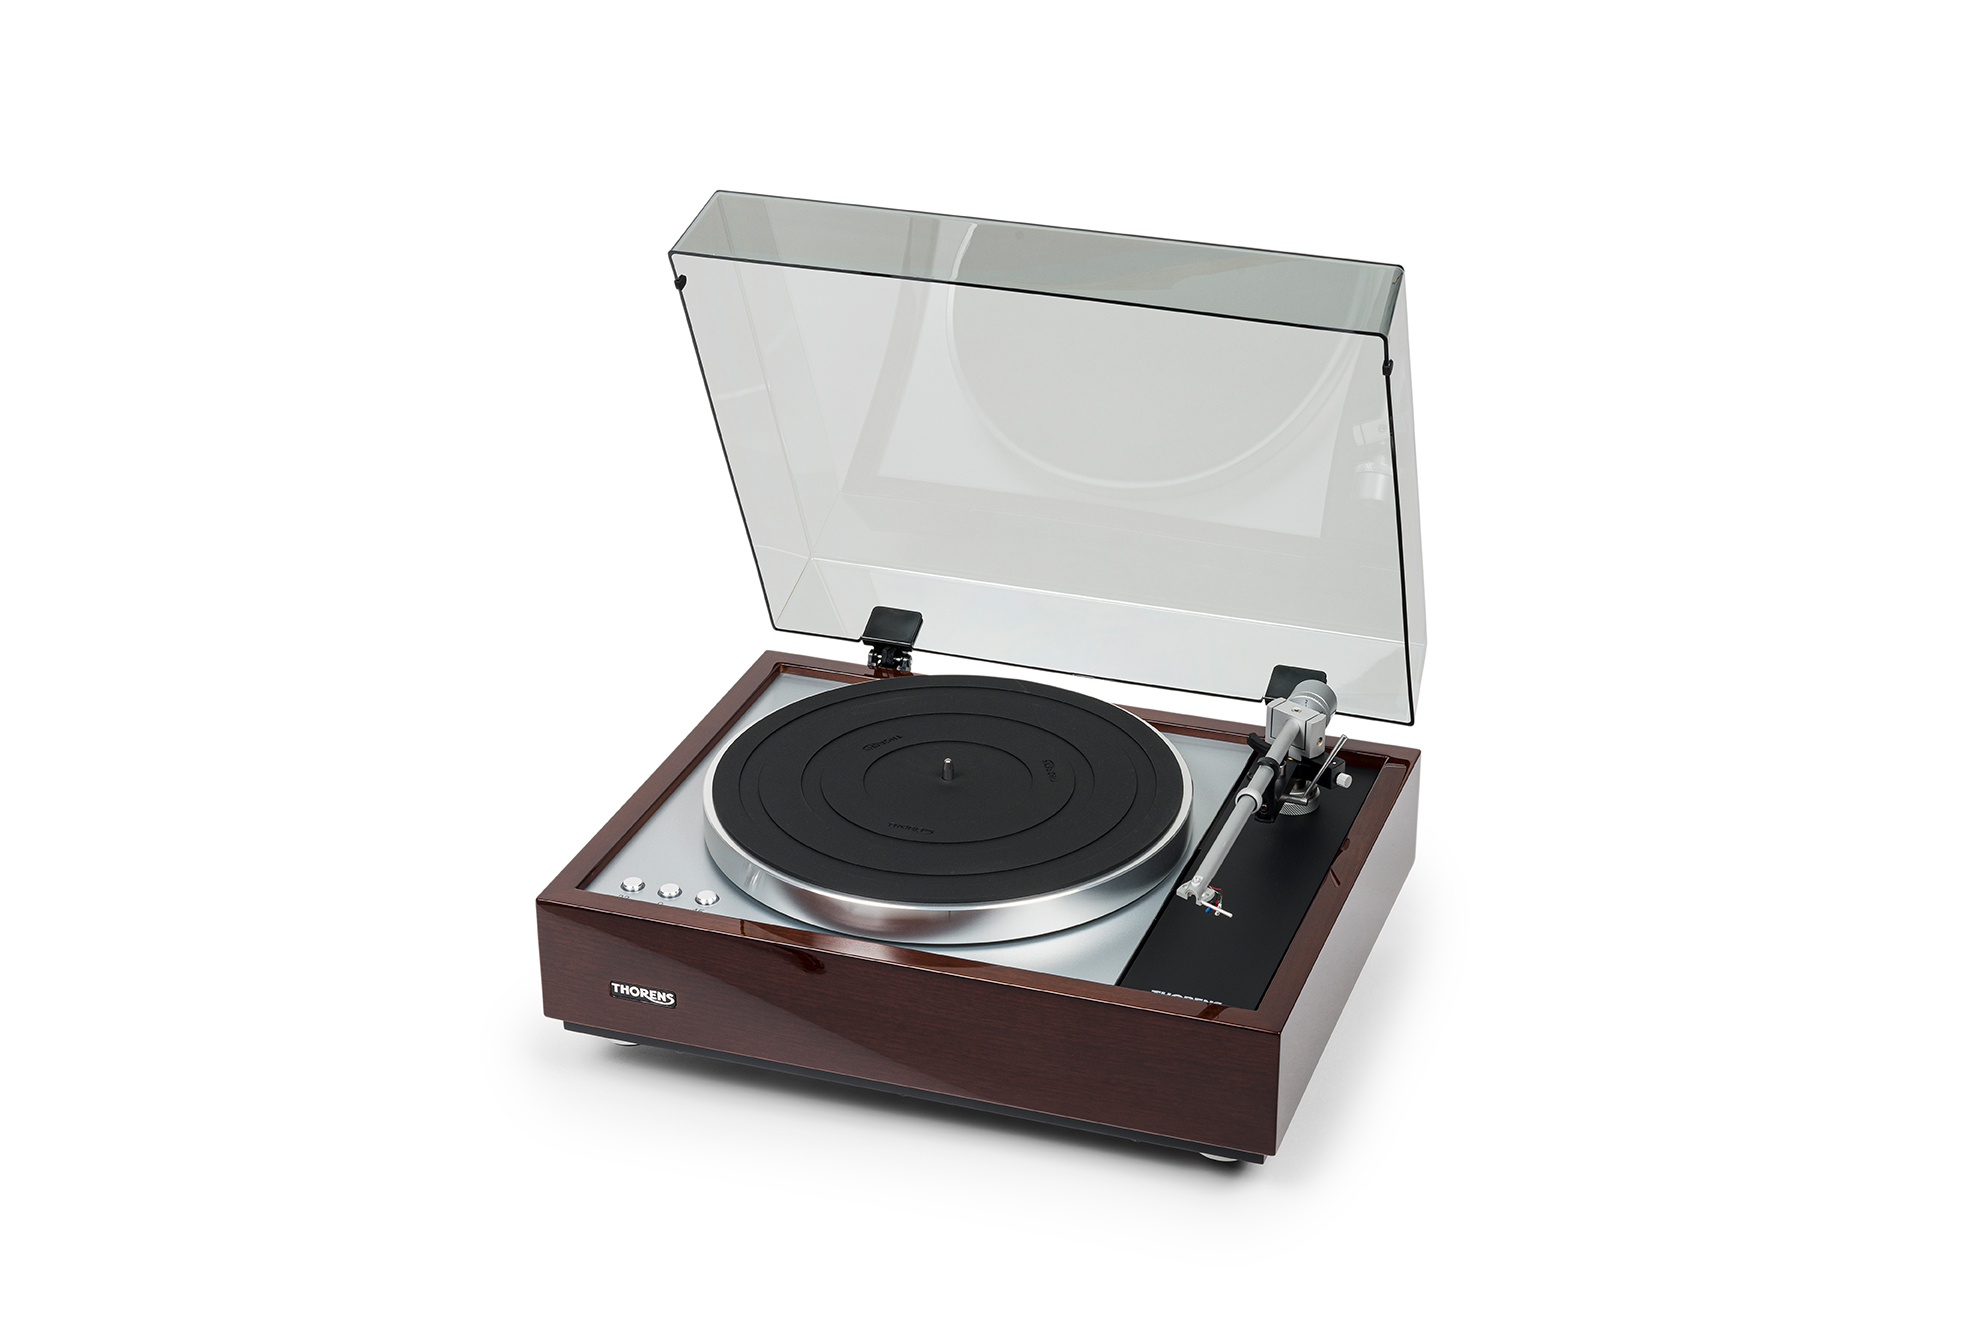 thorens record player, cue lever